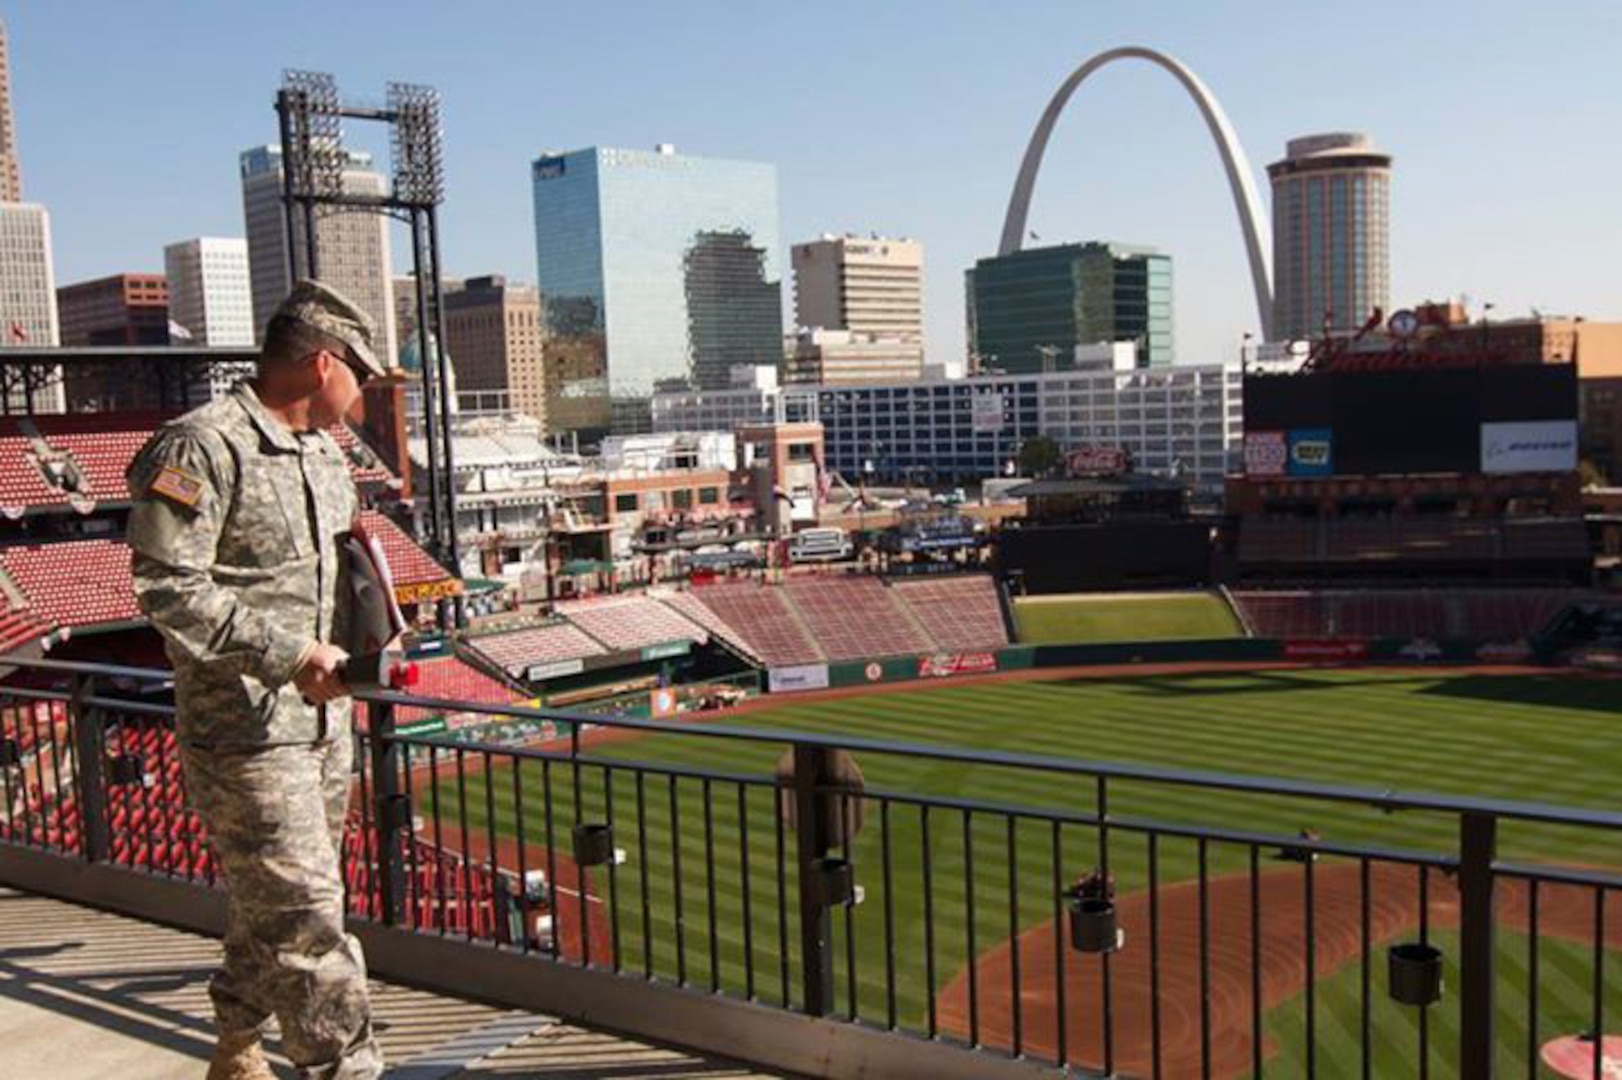 Members of the Missouri National Guard 7th Weapons of Mass Destruction Civil Support Team were on hand at Busch Stadium to support safety and security measures during the 2013 World Series.